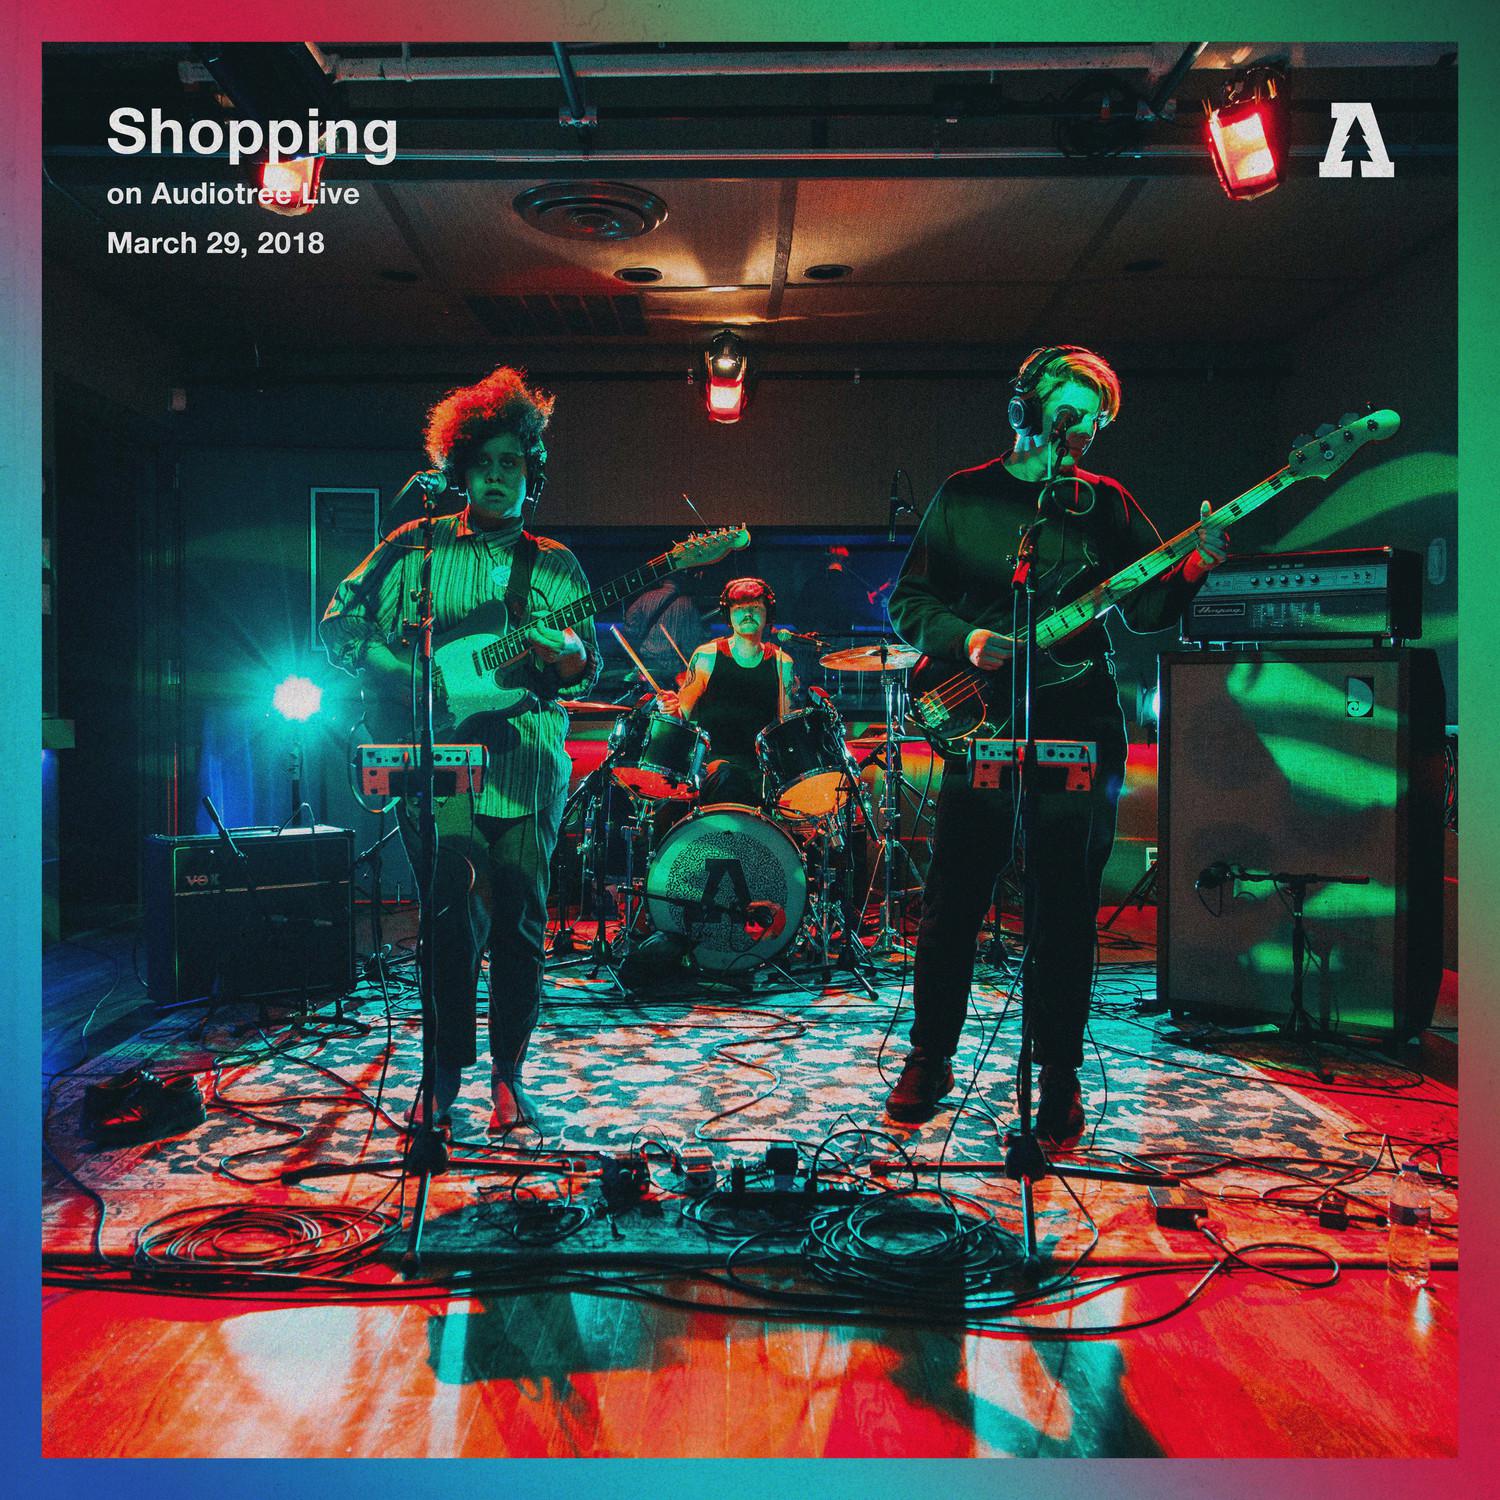 Shopping on Audiotree Live